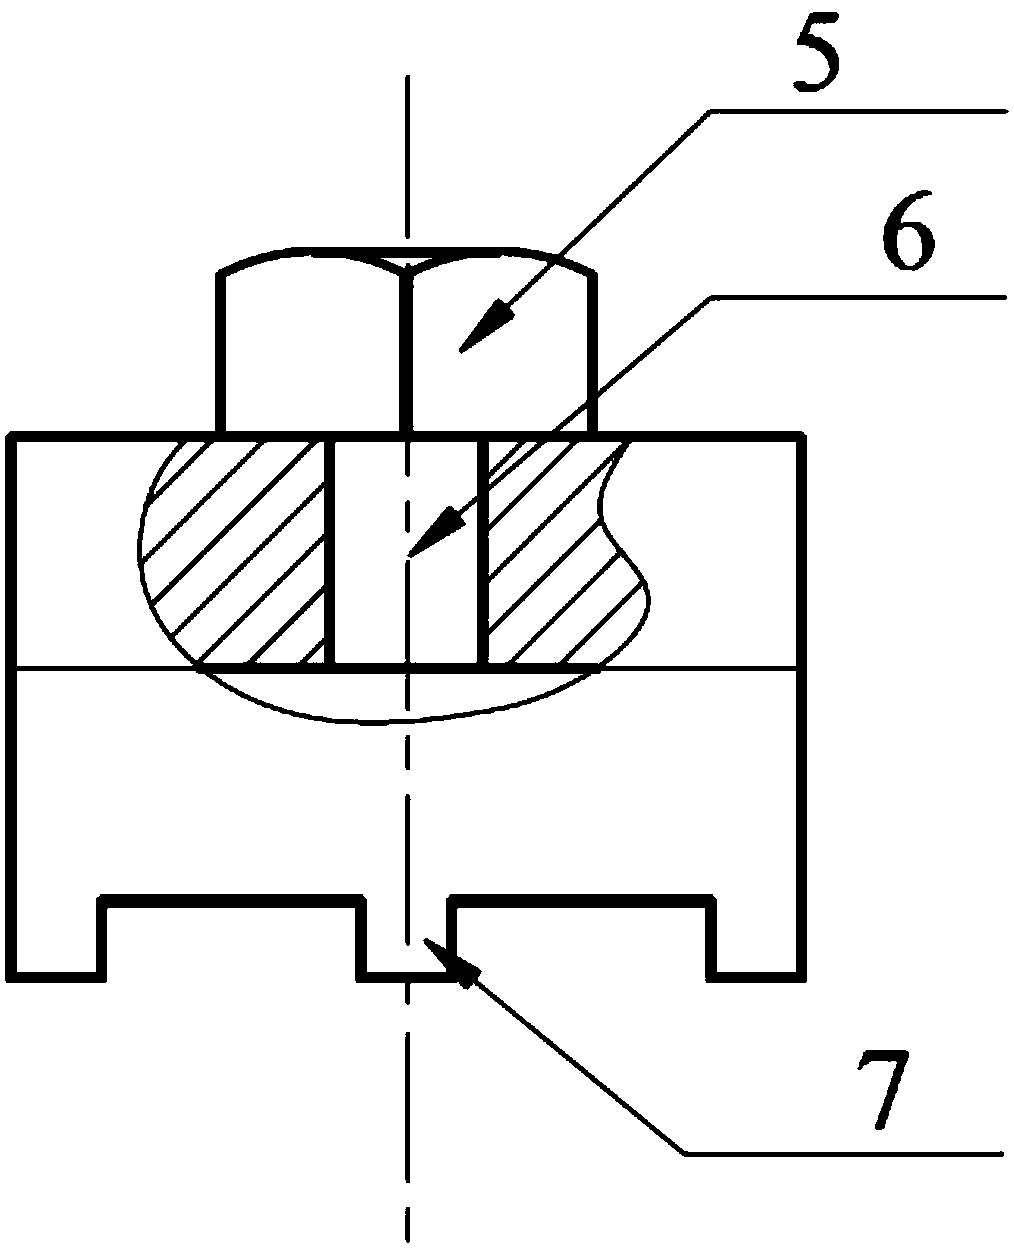 Maintenance and installation tool for nuclear-grade regulating valve base